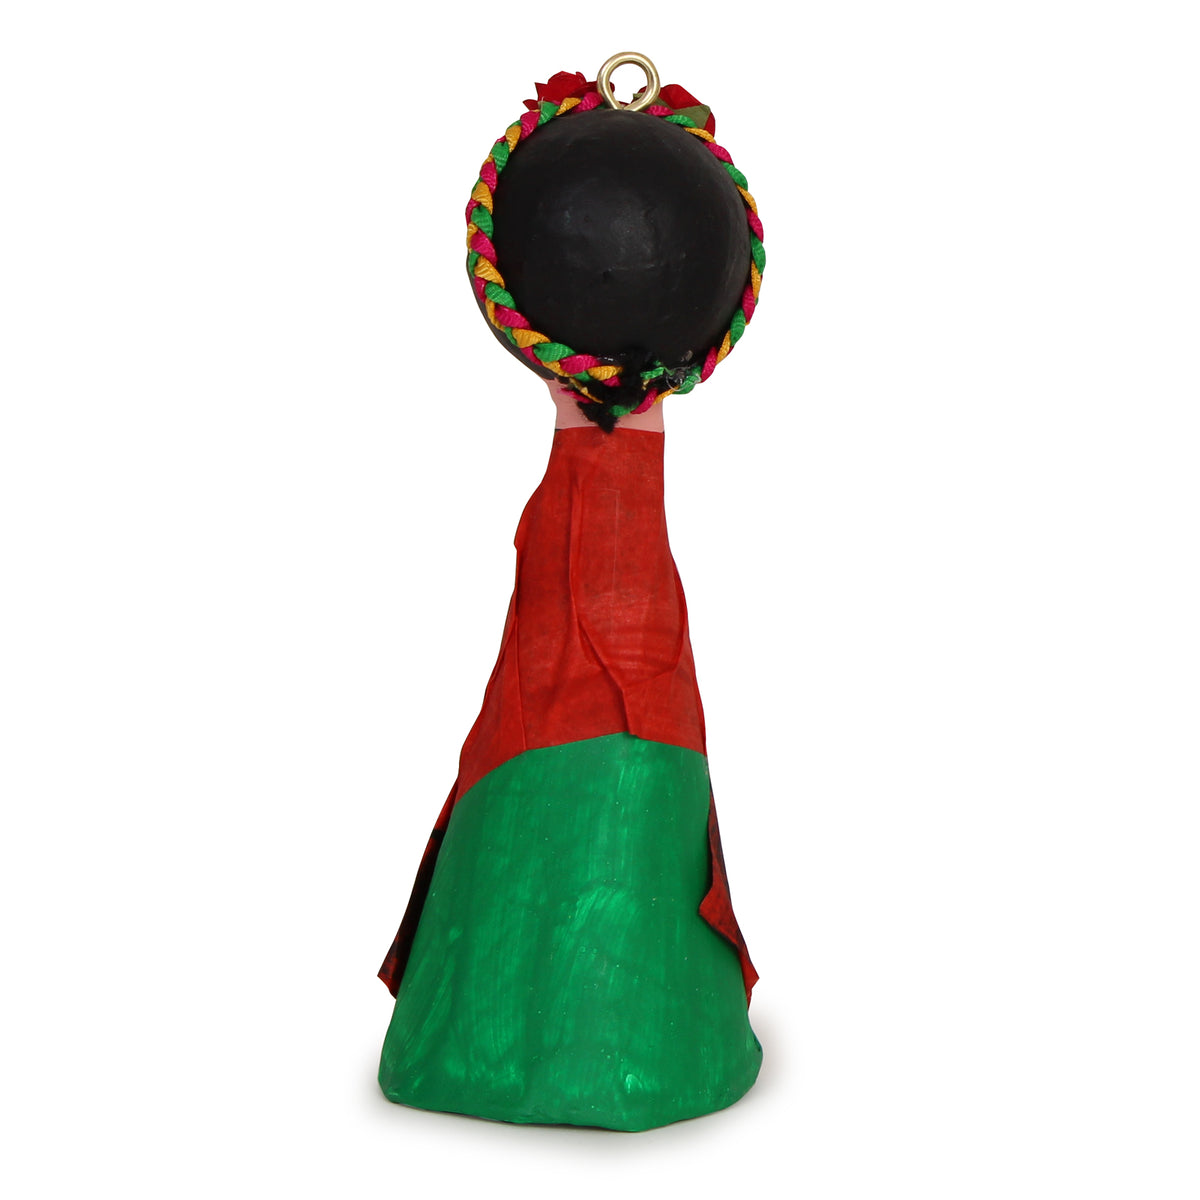 Back view of the Frida Kahlo Tall Ornament.